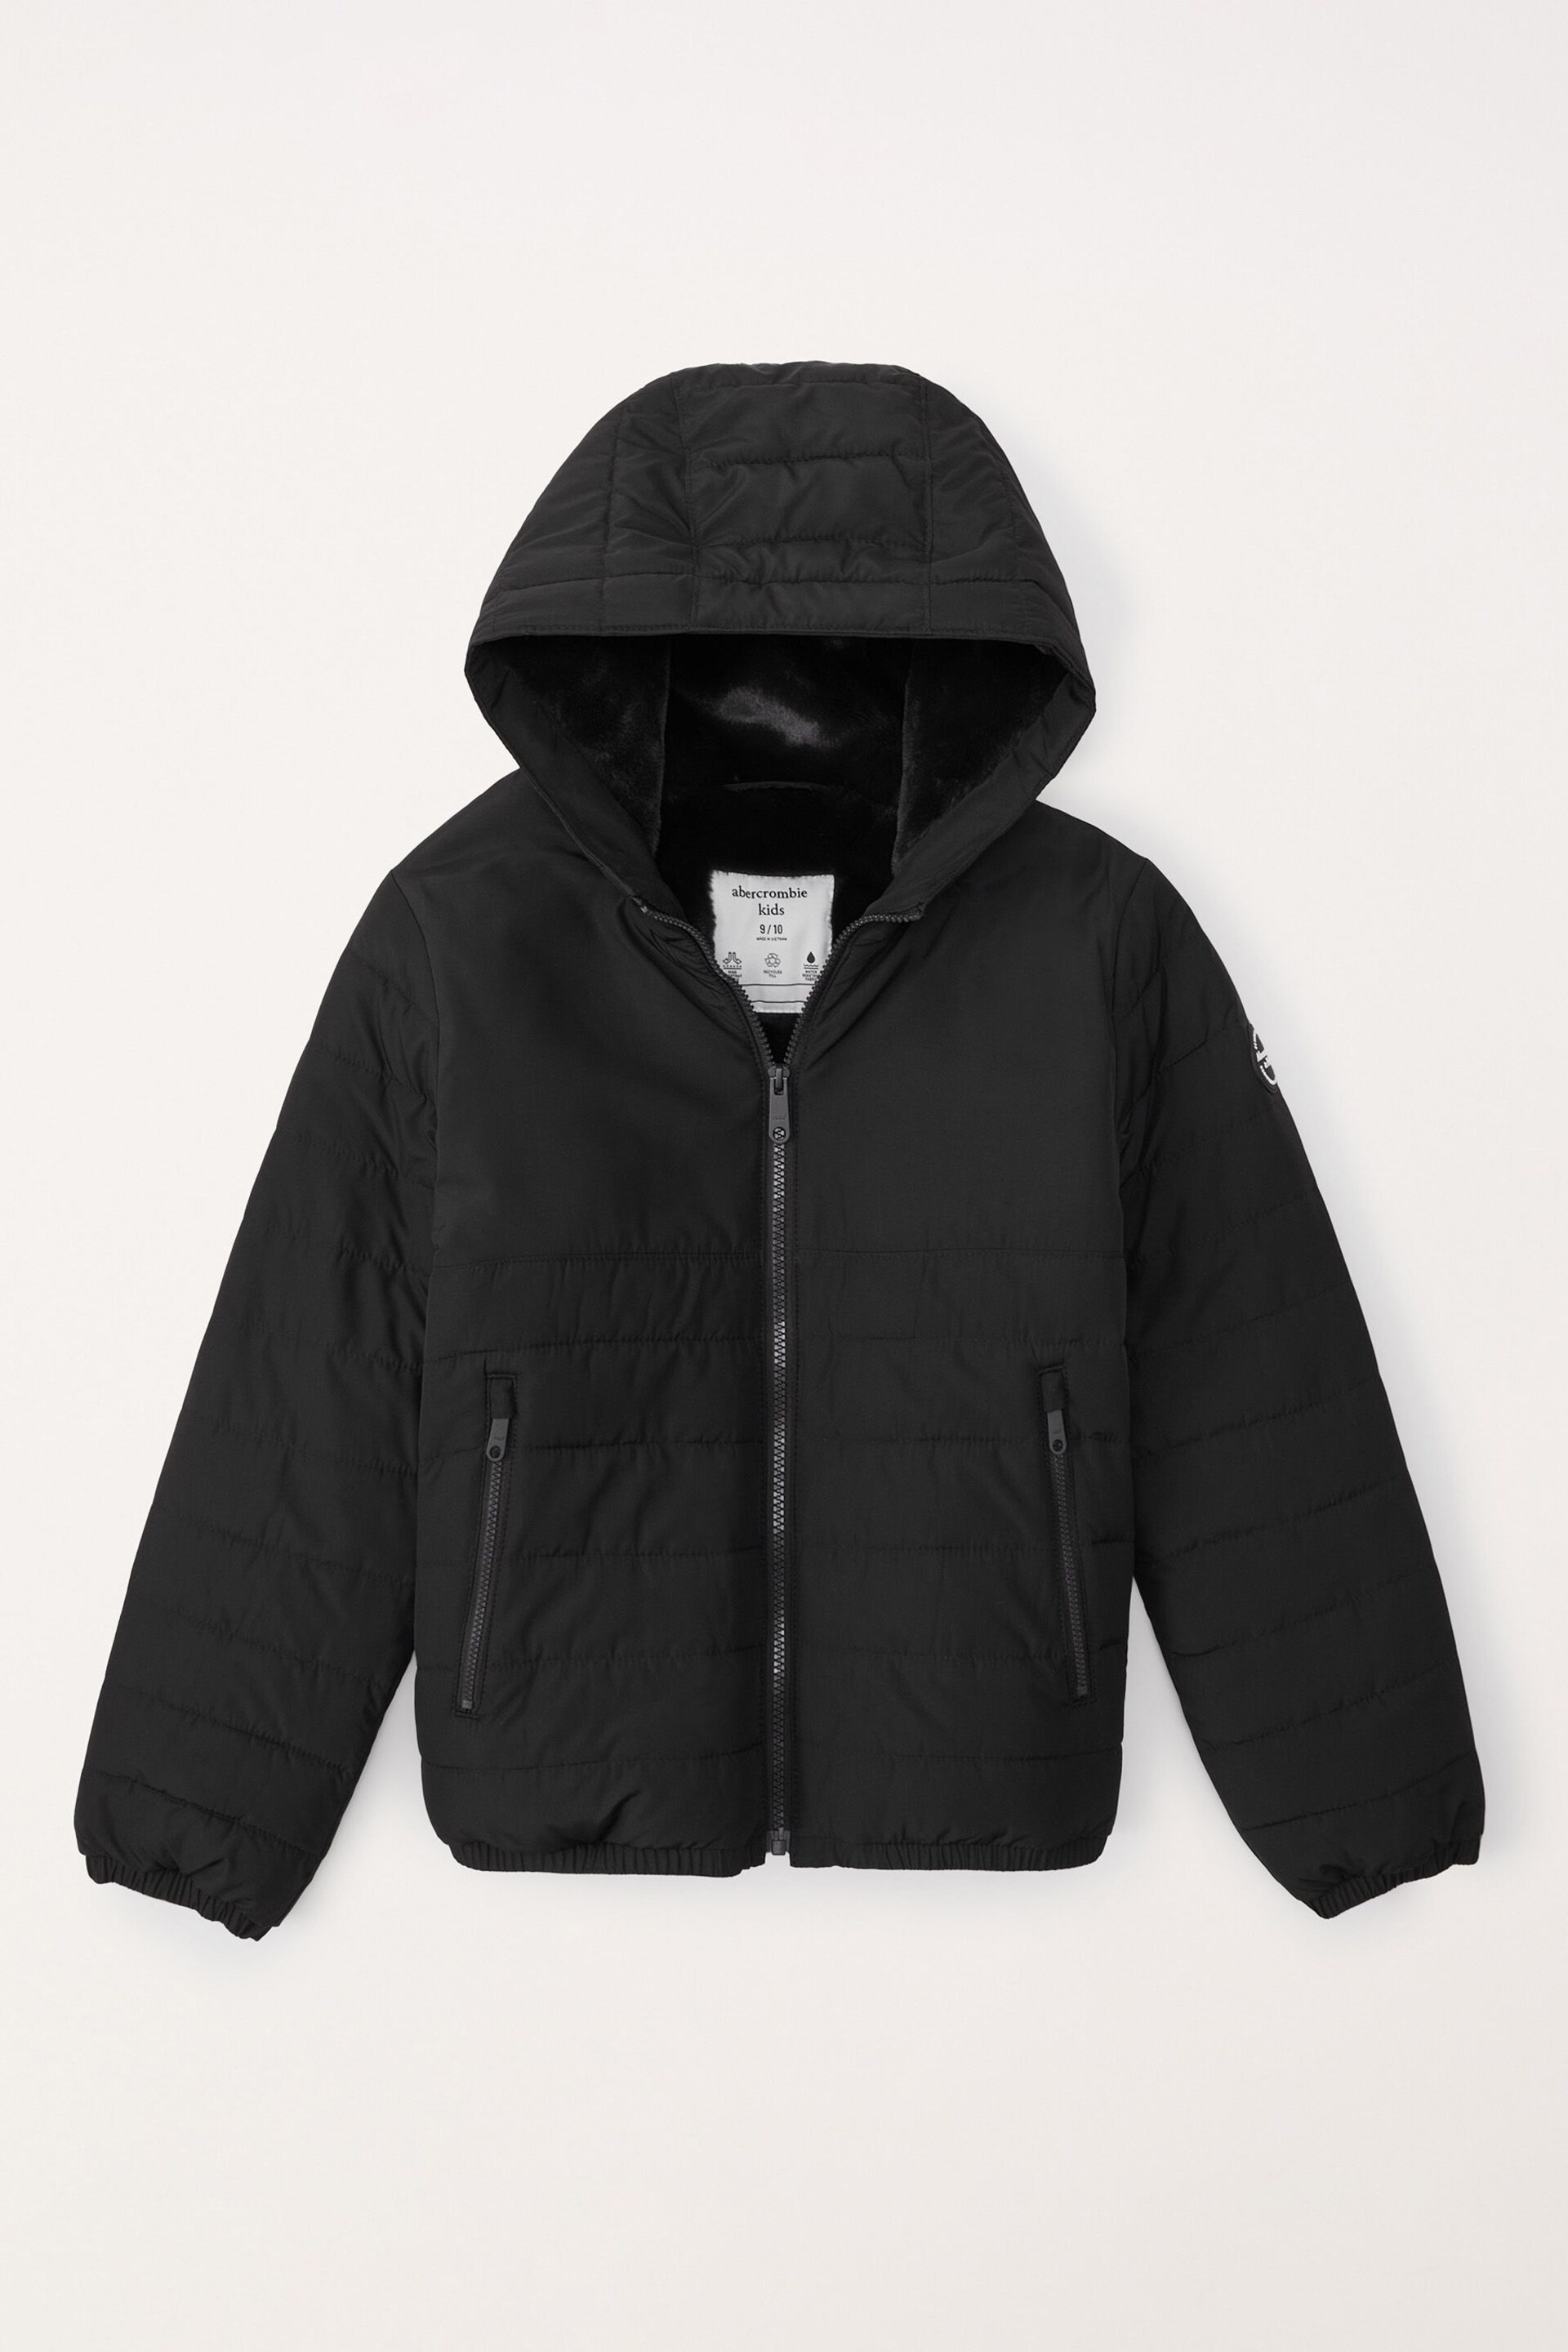 Abercrombie & Fitch Puffer Jacket Black Coat - Image 1 of 6